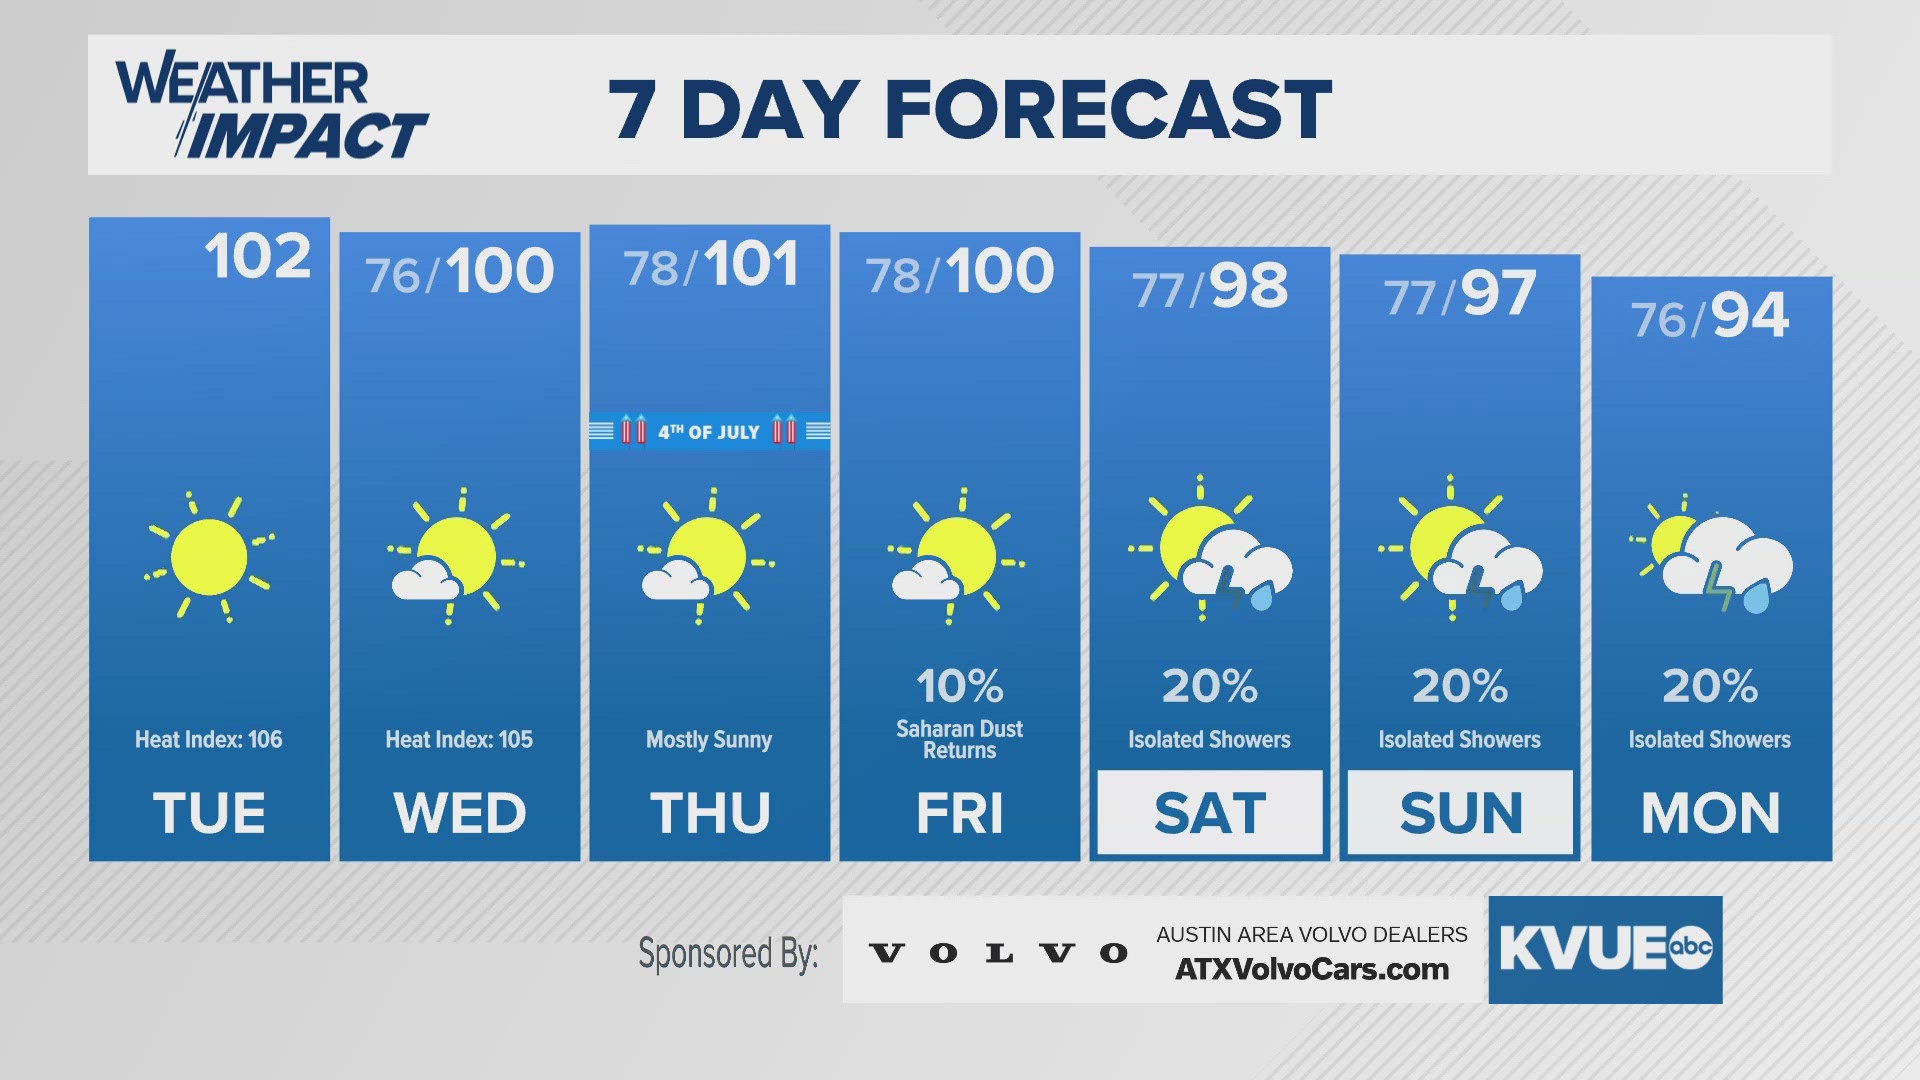 Hot and hazy for the rest of the workweek; isolated rain chances return for the weekend